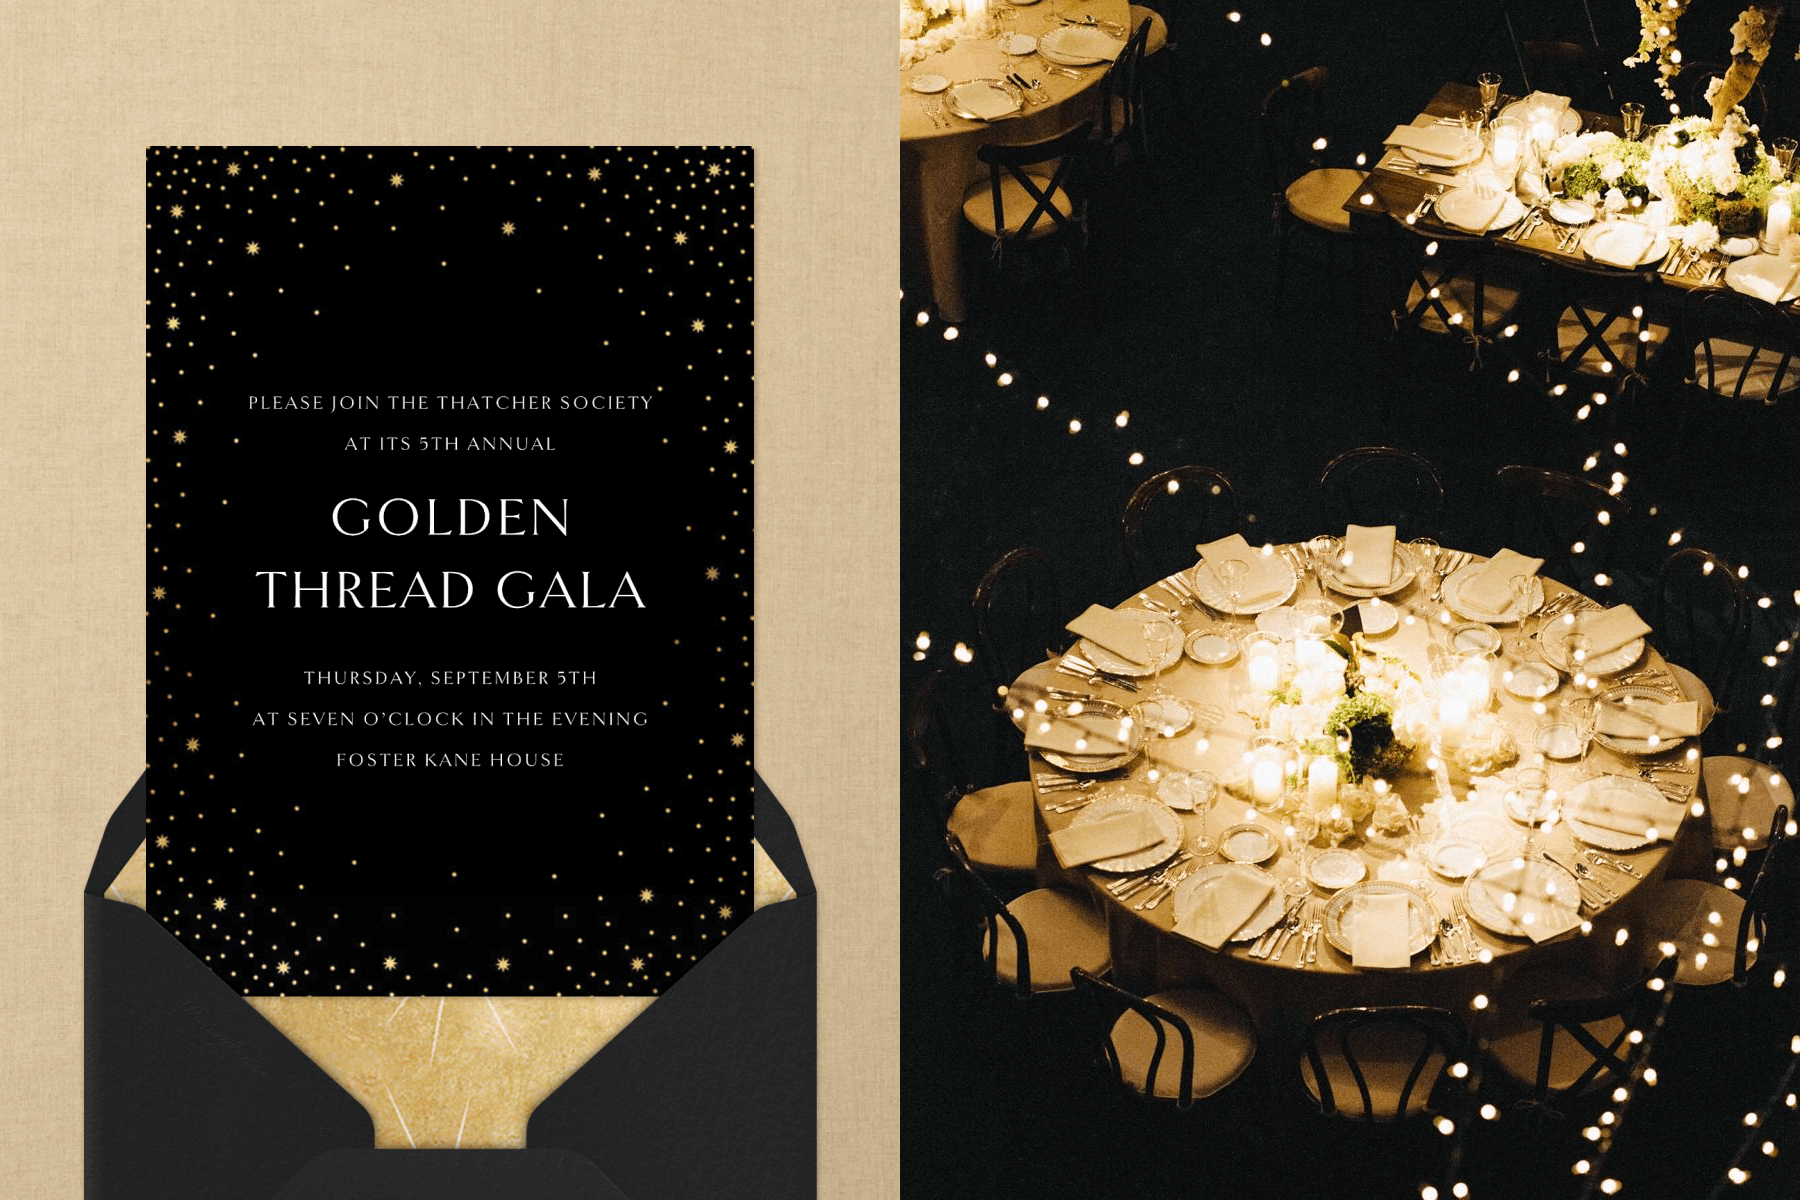 Left: A black and gold invitation with a gold dot border reads “golden thread” gala shown with a matching gold lined envelope. Right: An overhead view of a decorated table with white and gold place settings and twinkling string lights above.